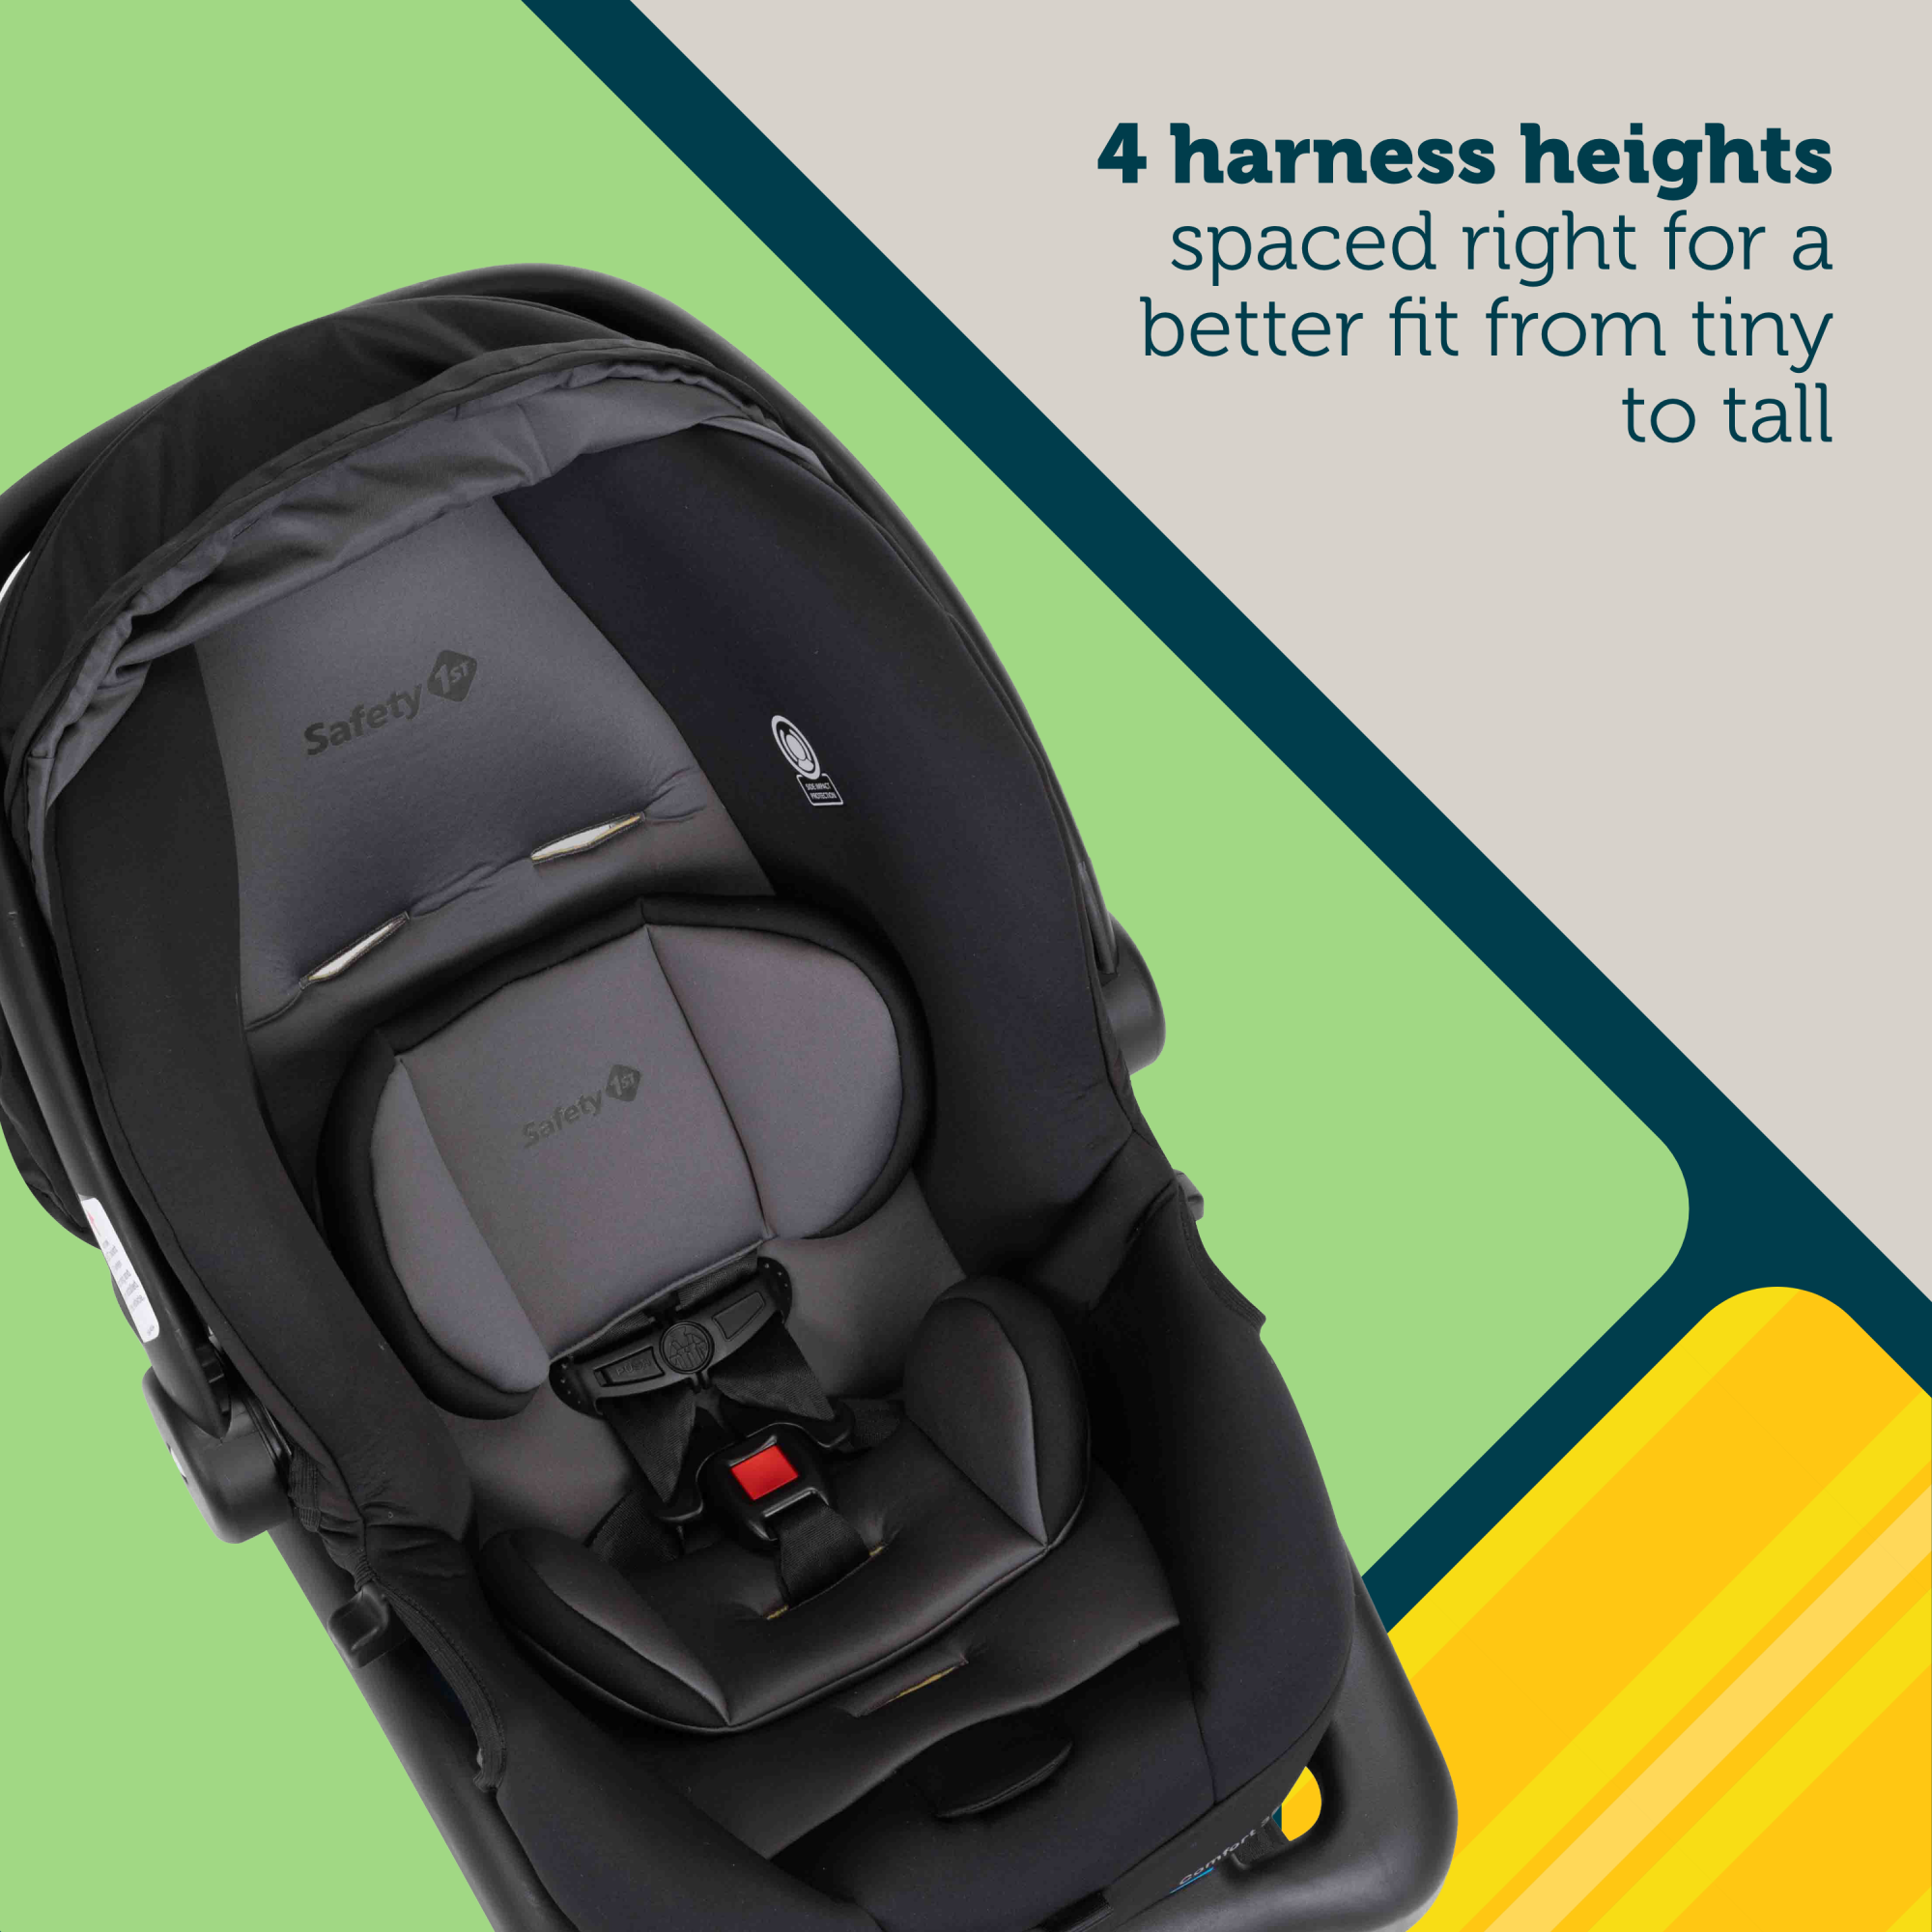 Comfort 35 Infant Car Seat - 4 harness heights spaced right for a better fit from tiny to tall